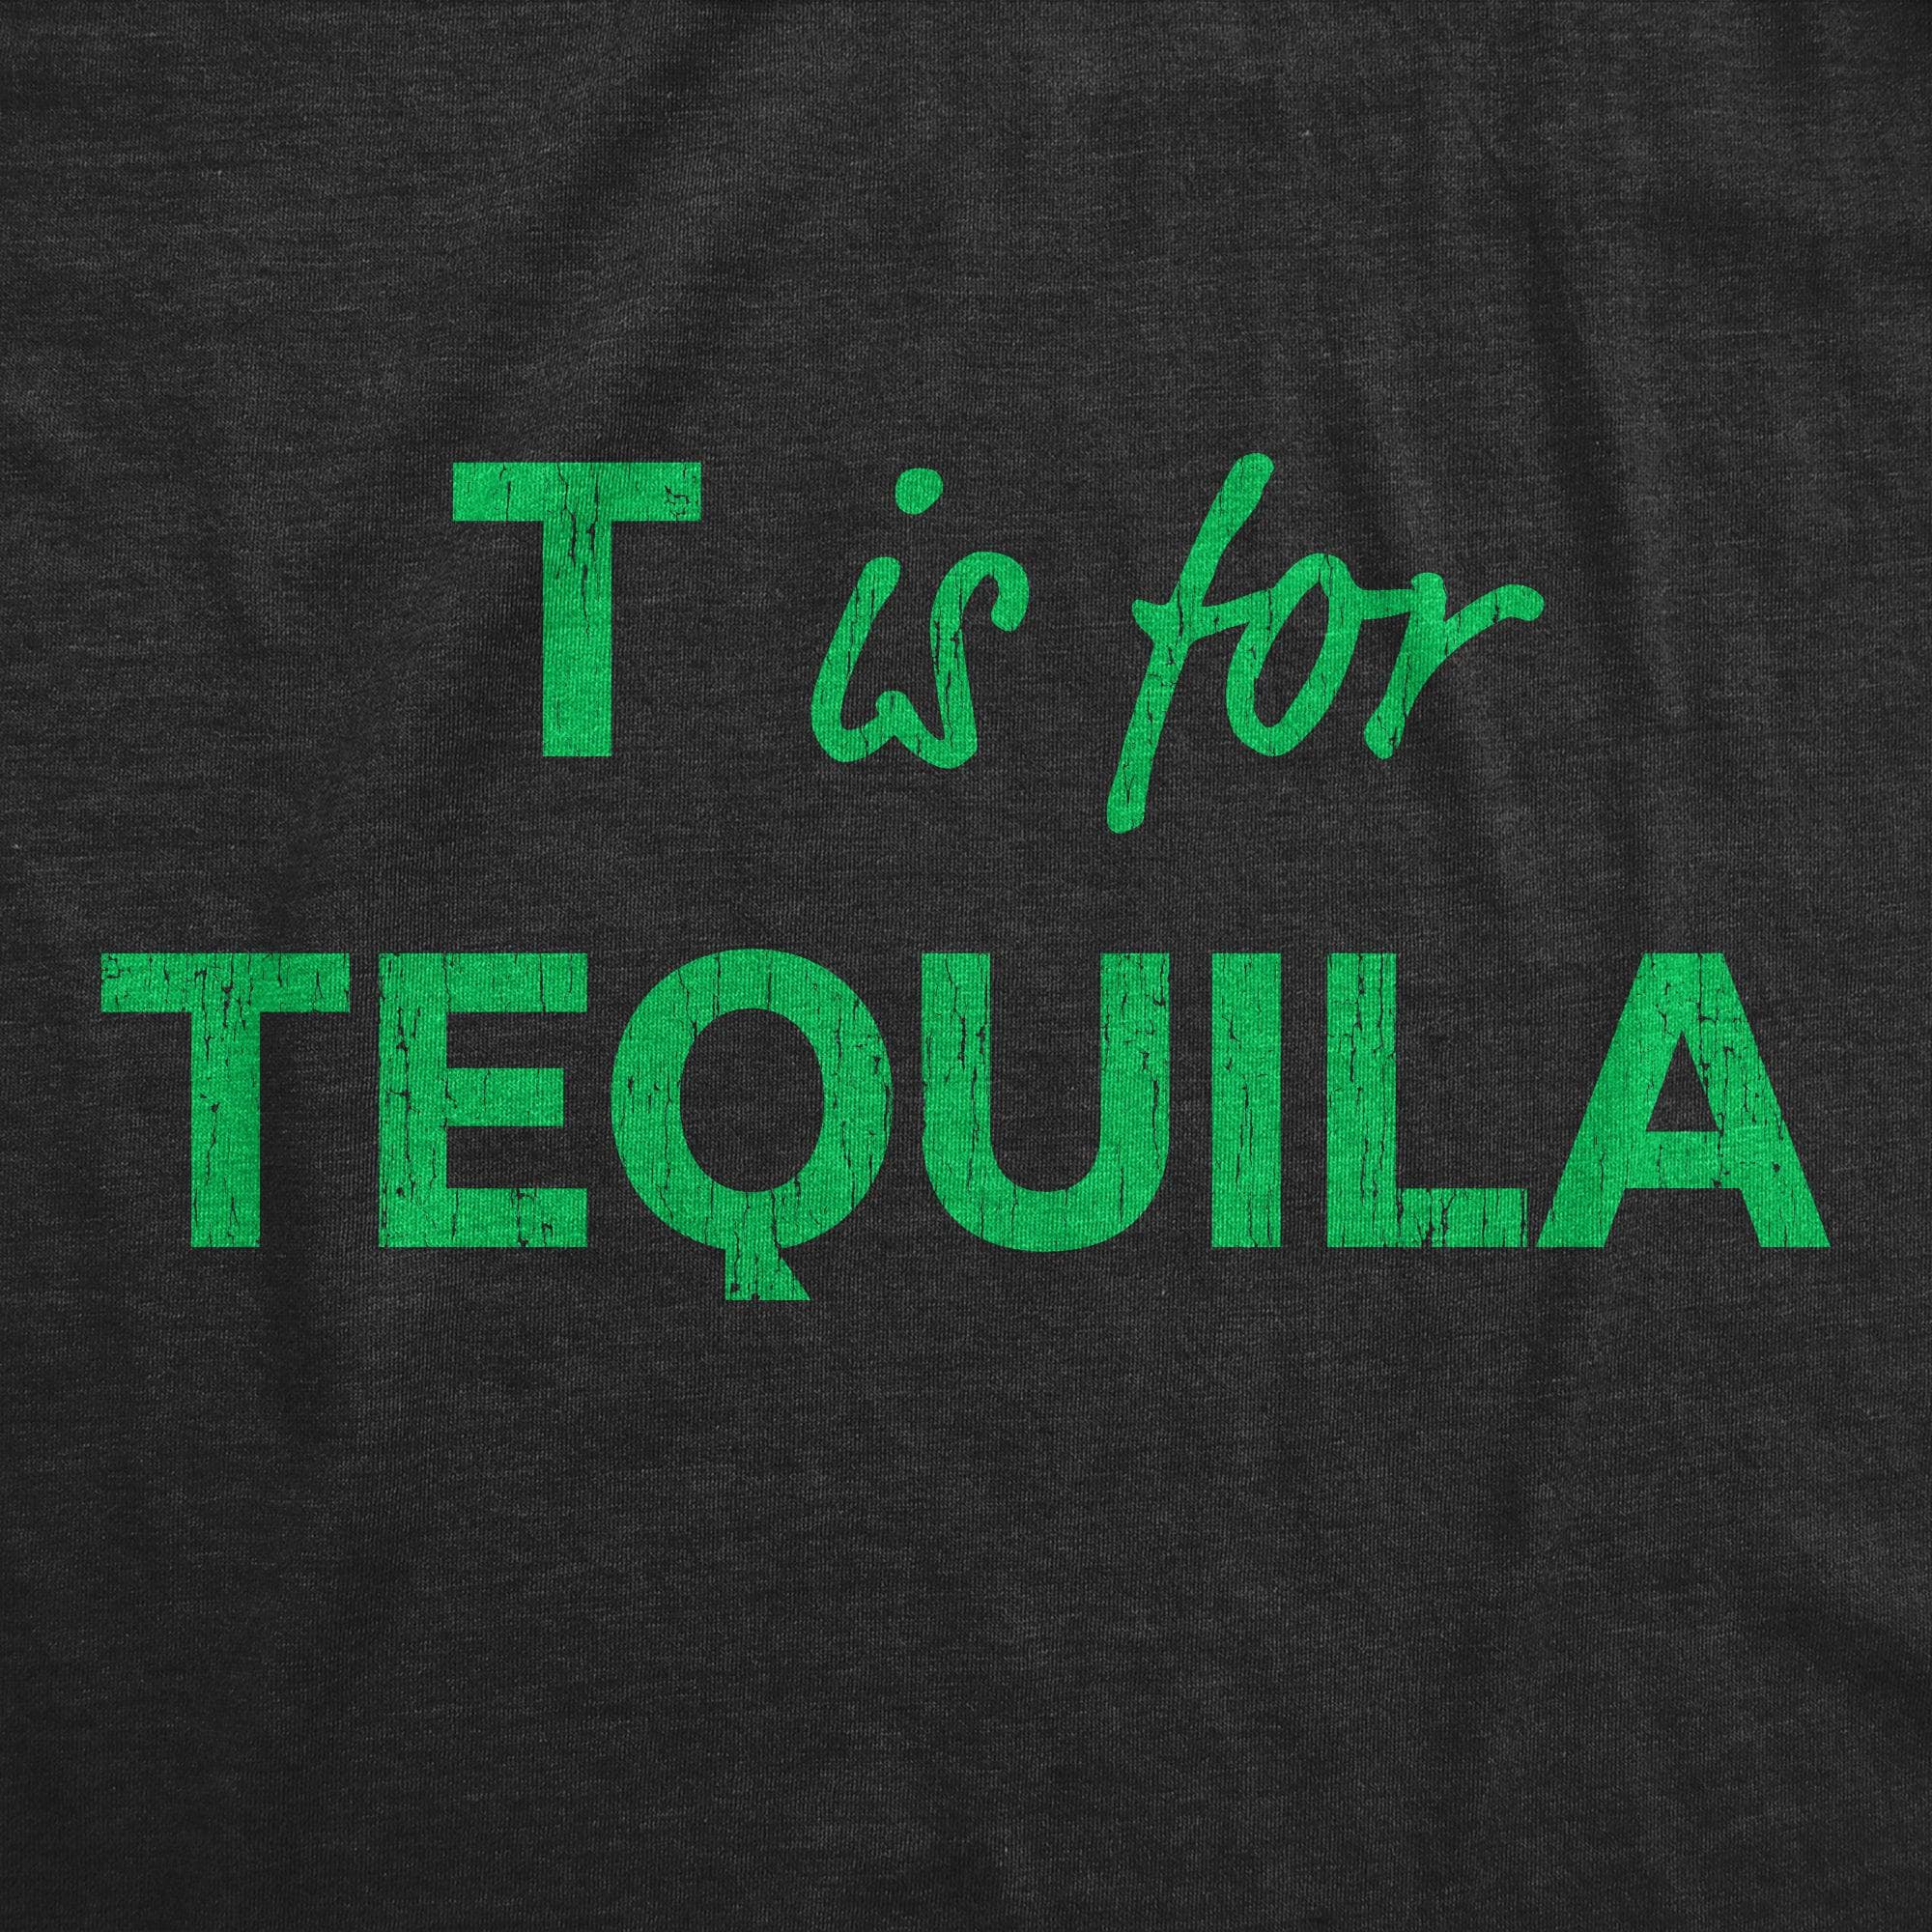 T Is For Tequila Men's Tshirt  -  Crazy Dog T-Shirts